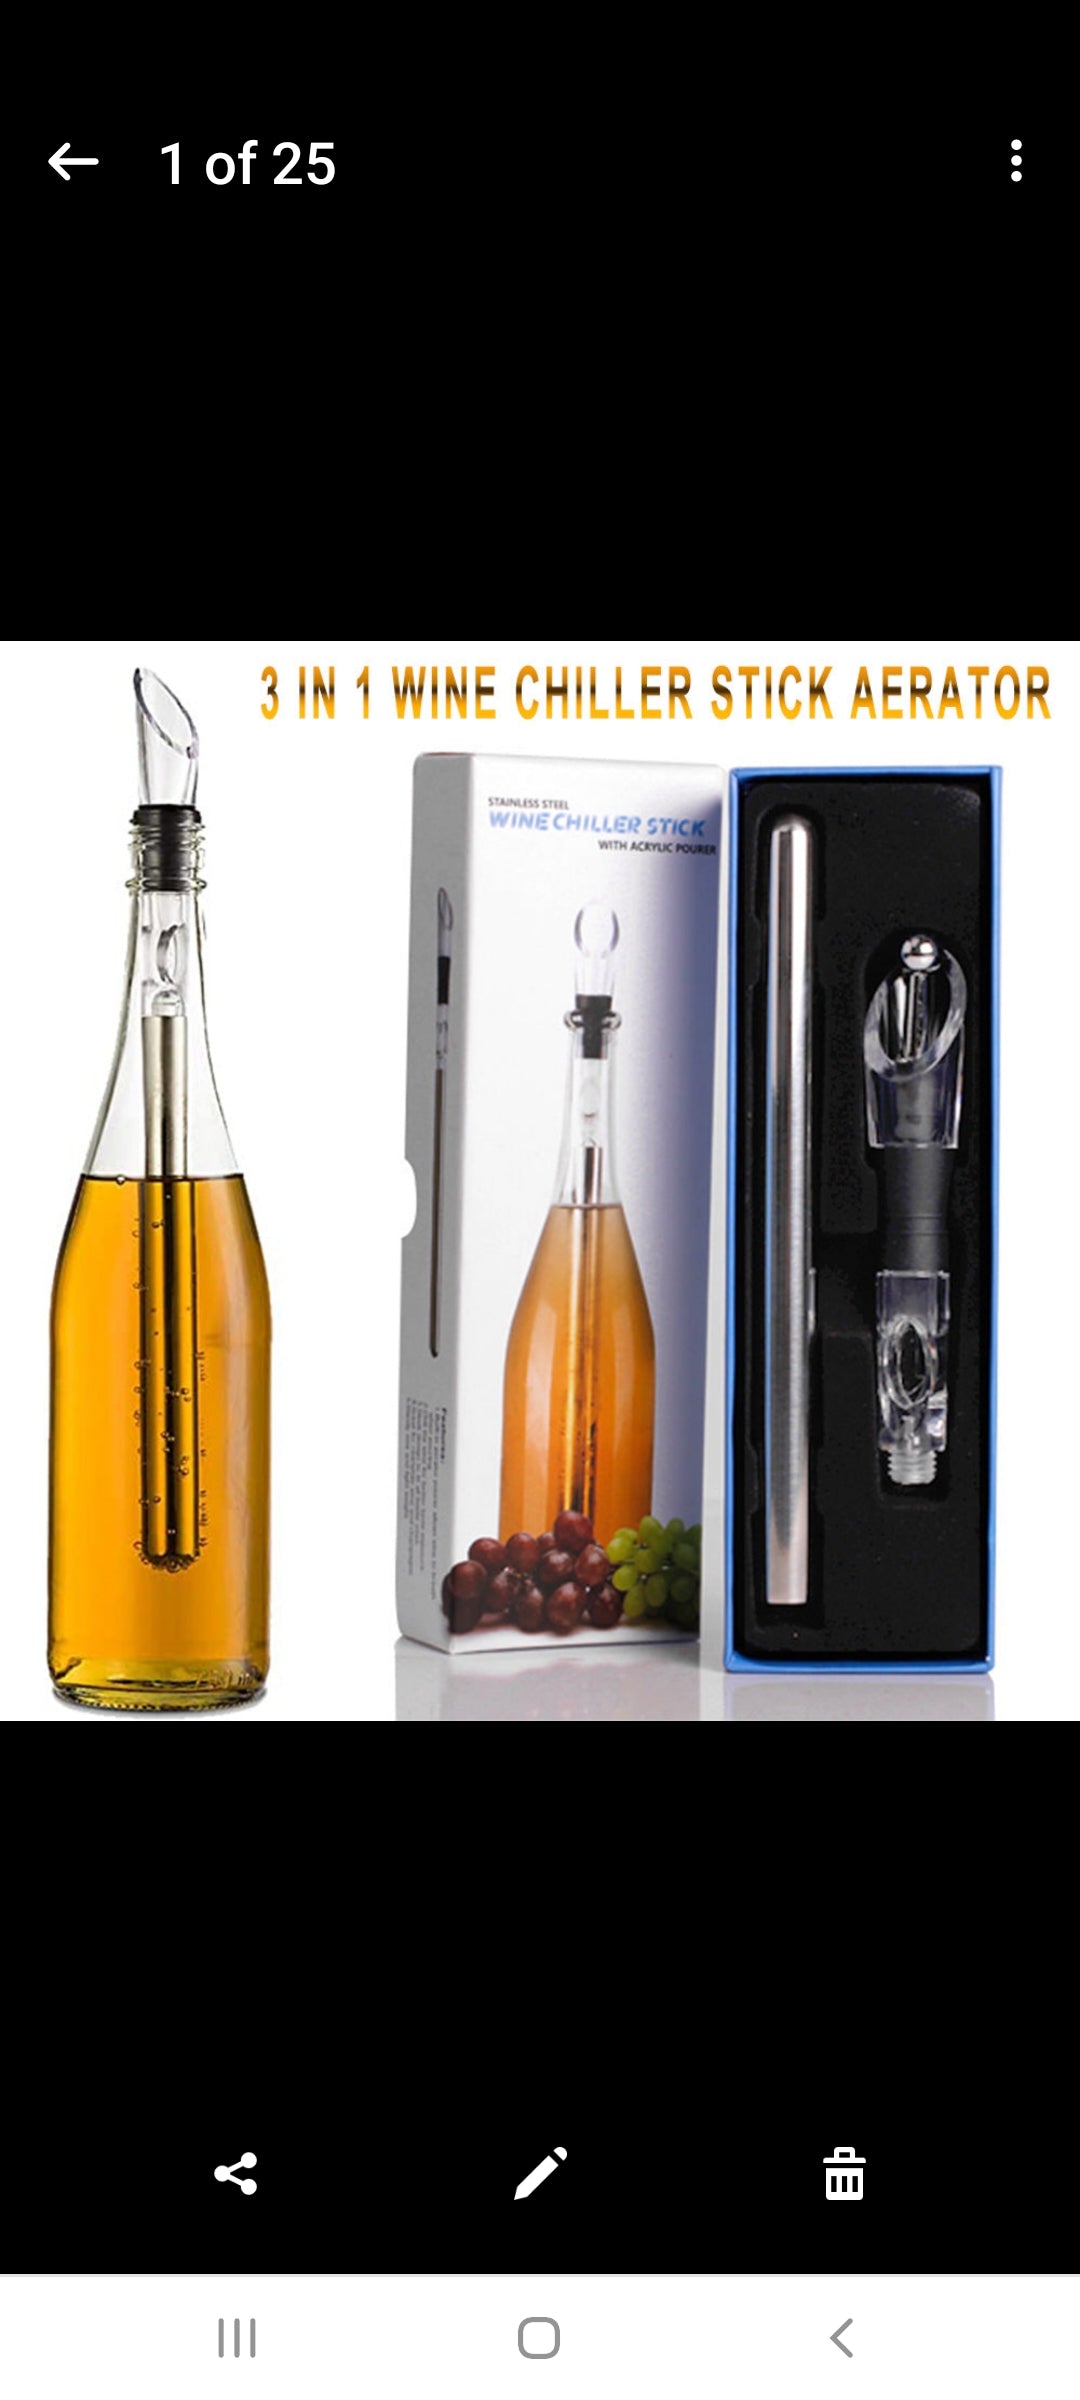 Wine chiller every wine drinker needs one makes a great gift!